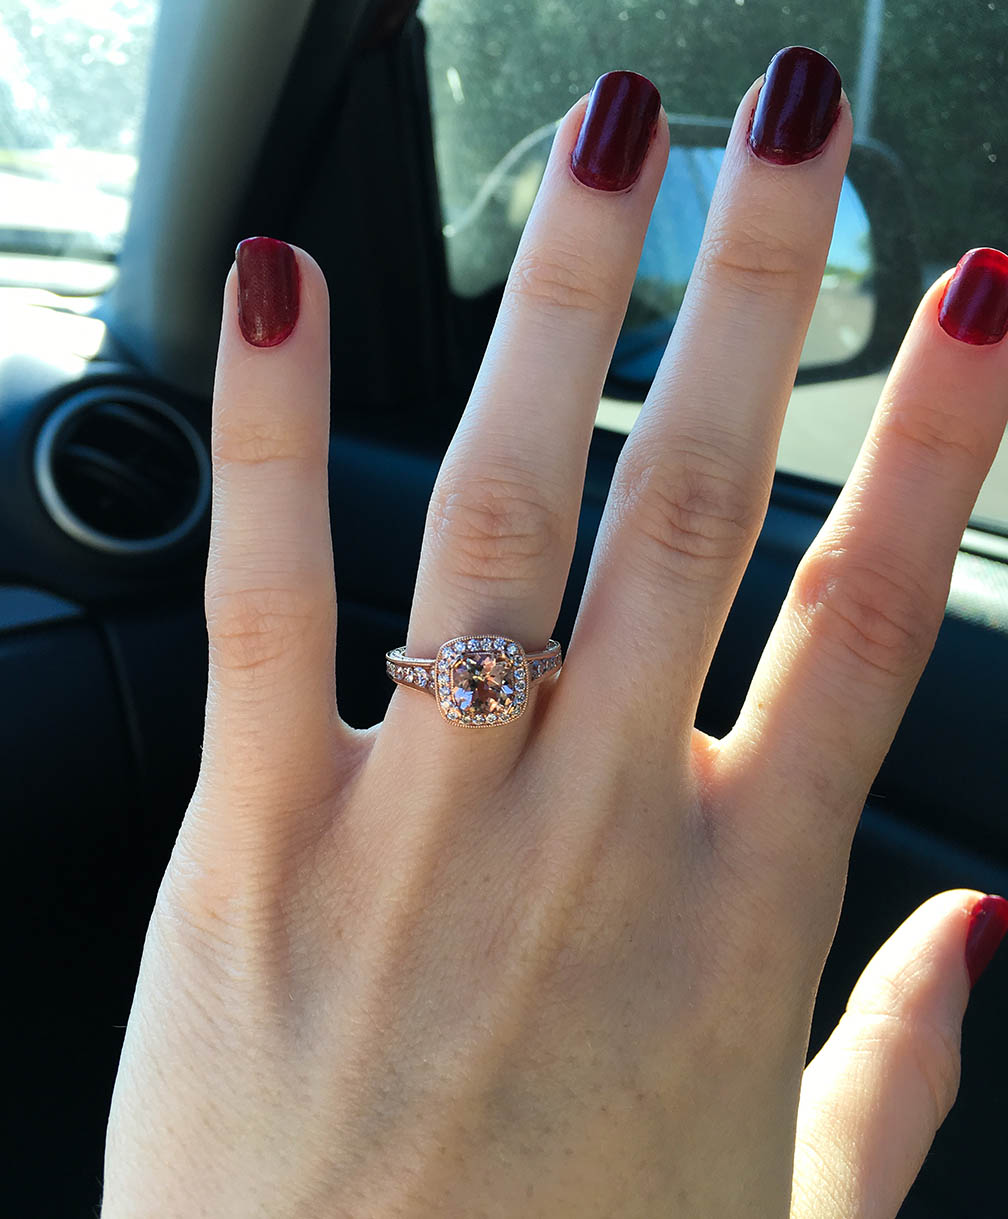 Happily ever after Engagement Ring